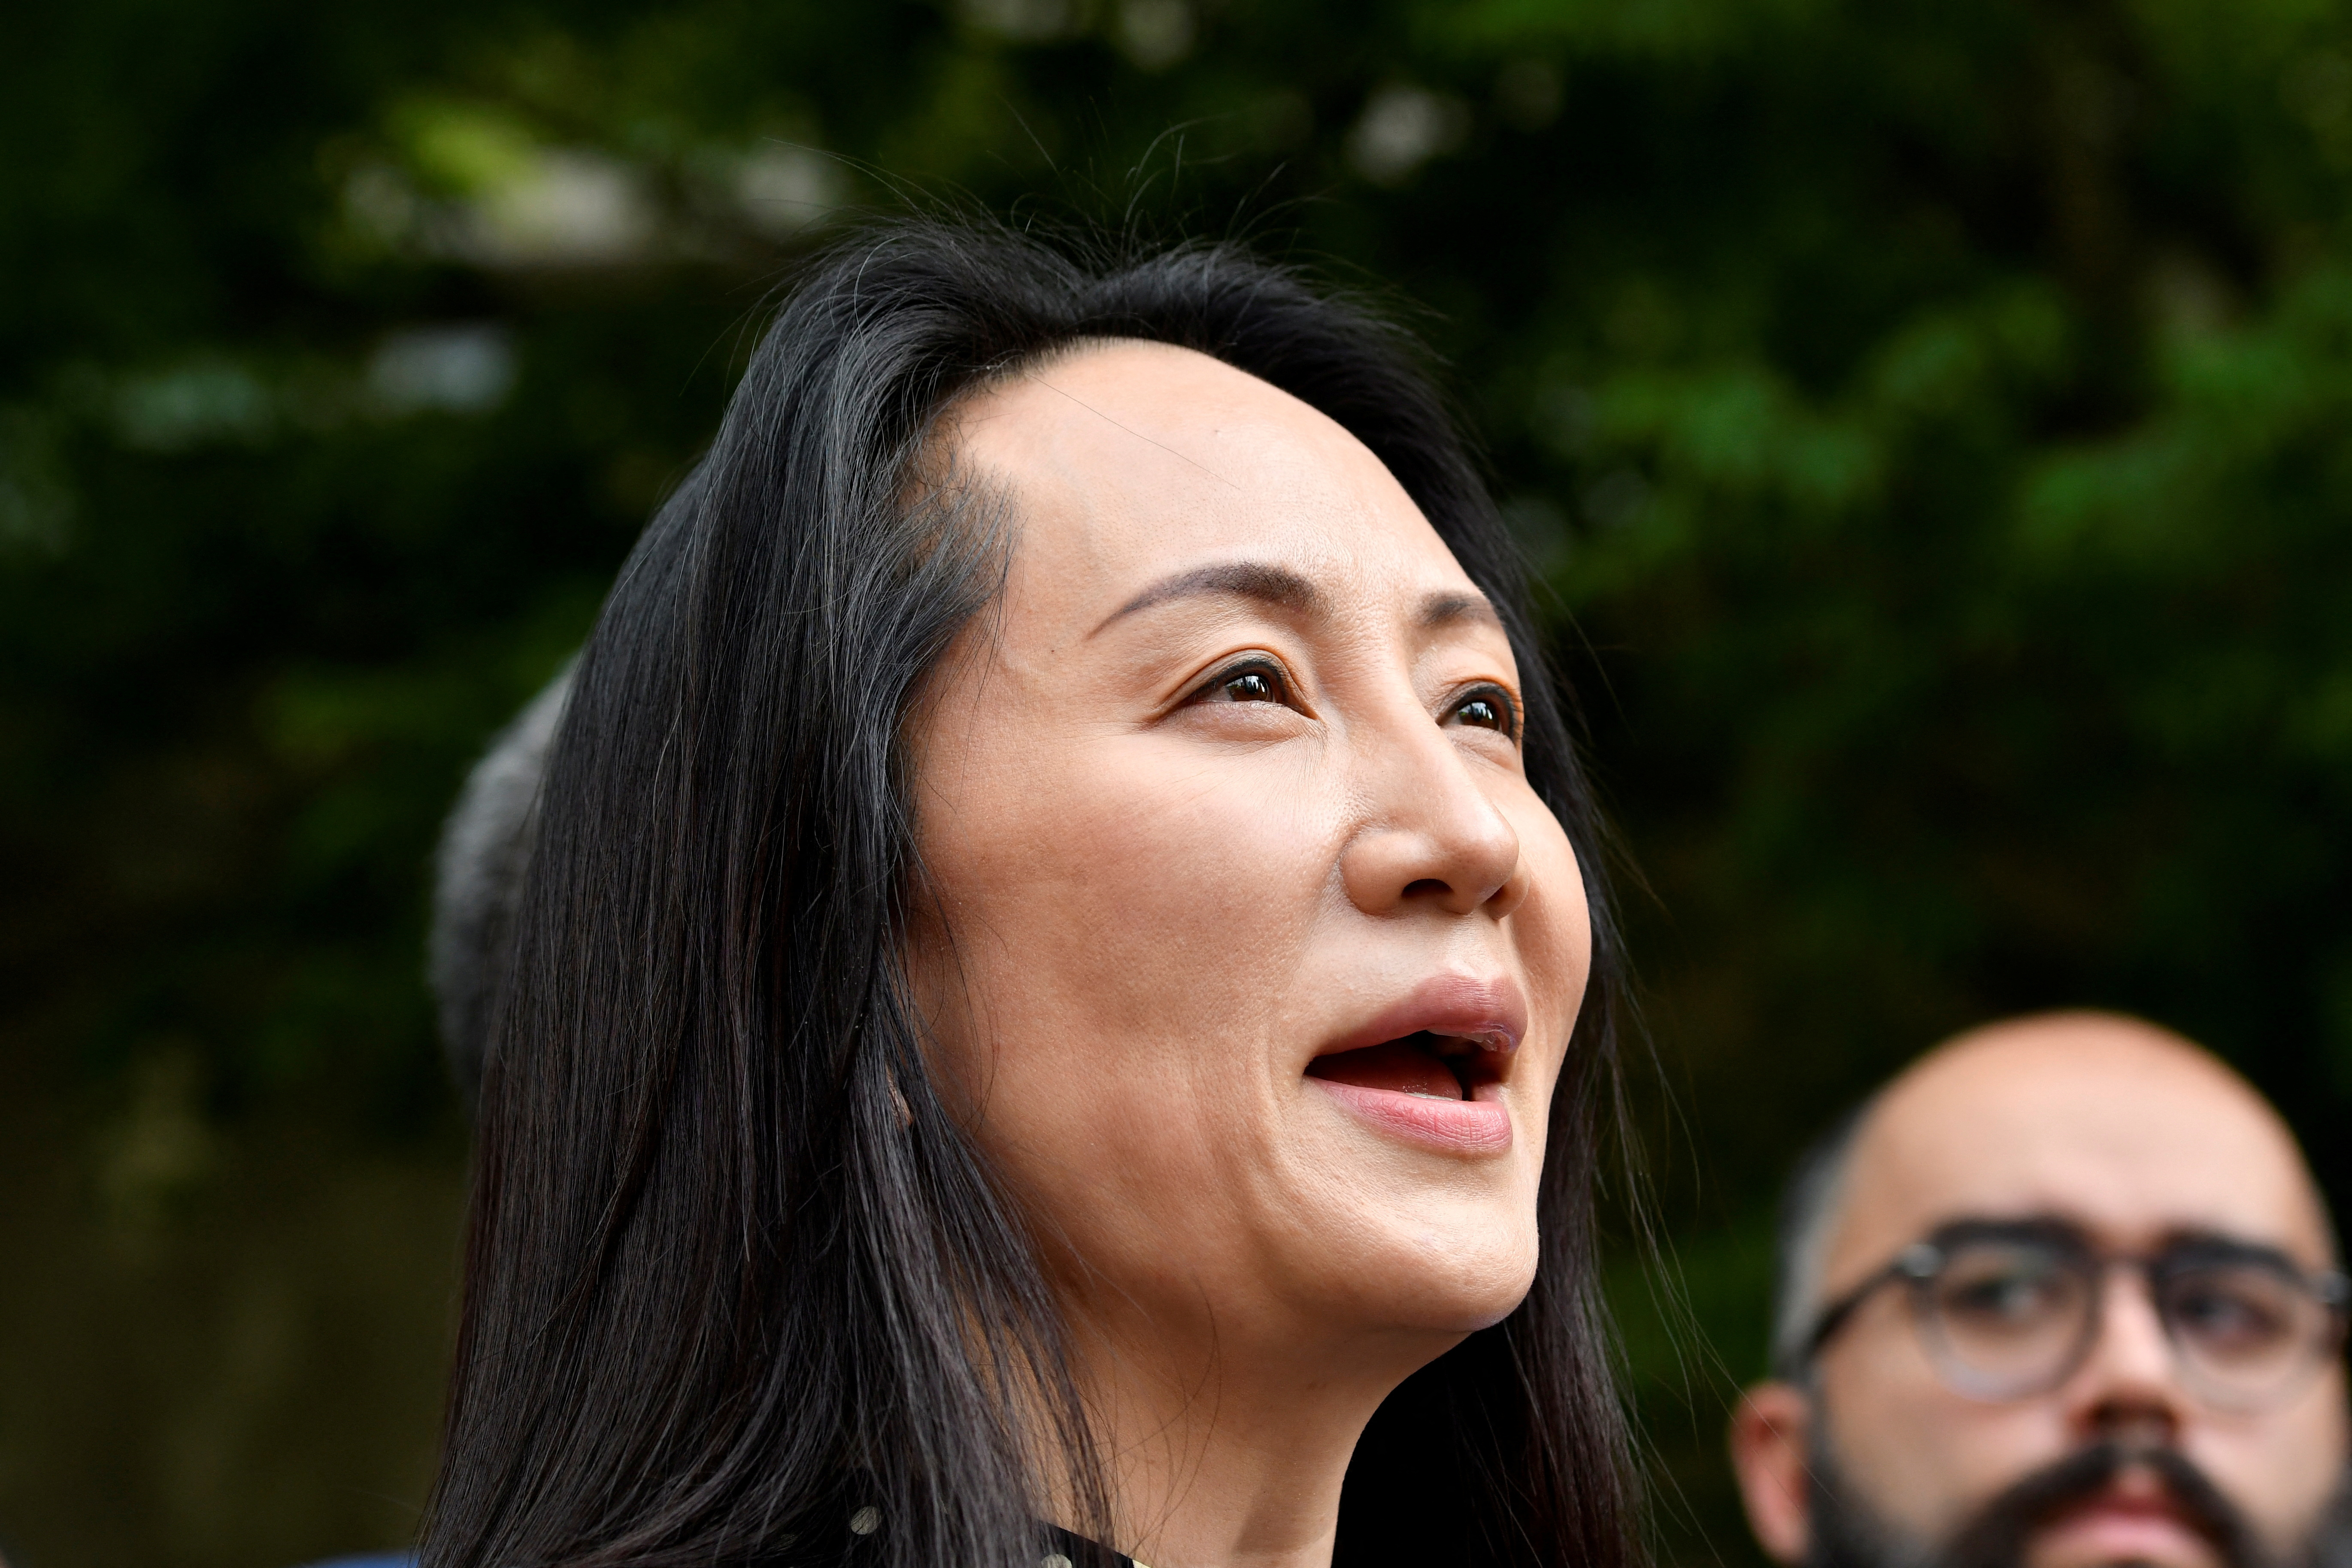 Huawei Technologies Chief Financial Officer Meng Wanzhou leaves a court hearing in Vancouver